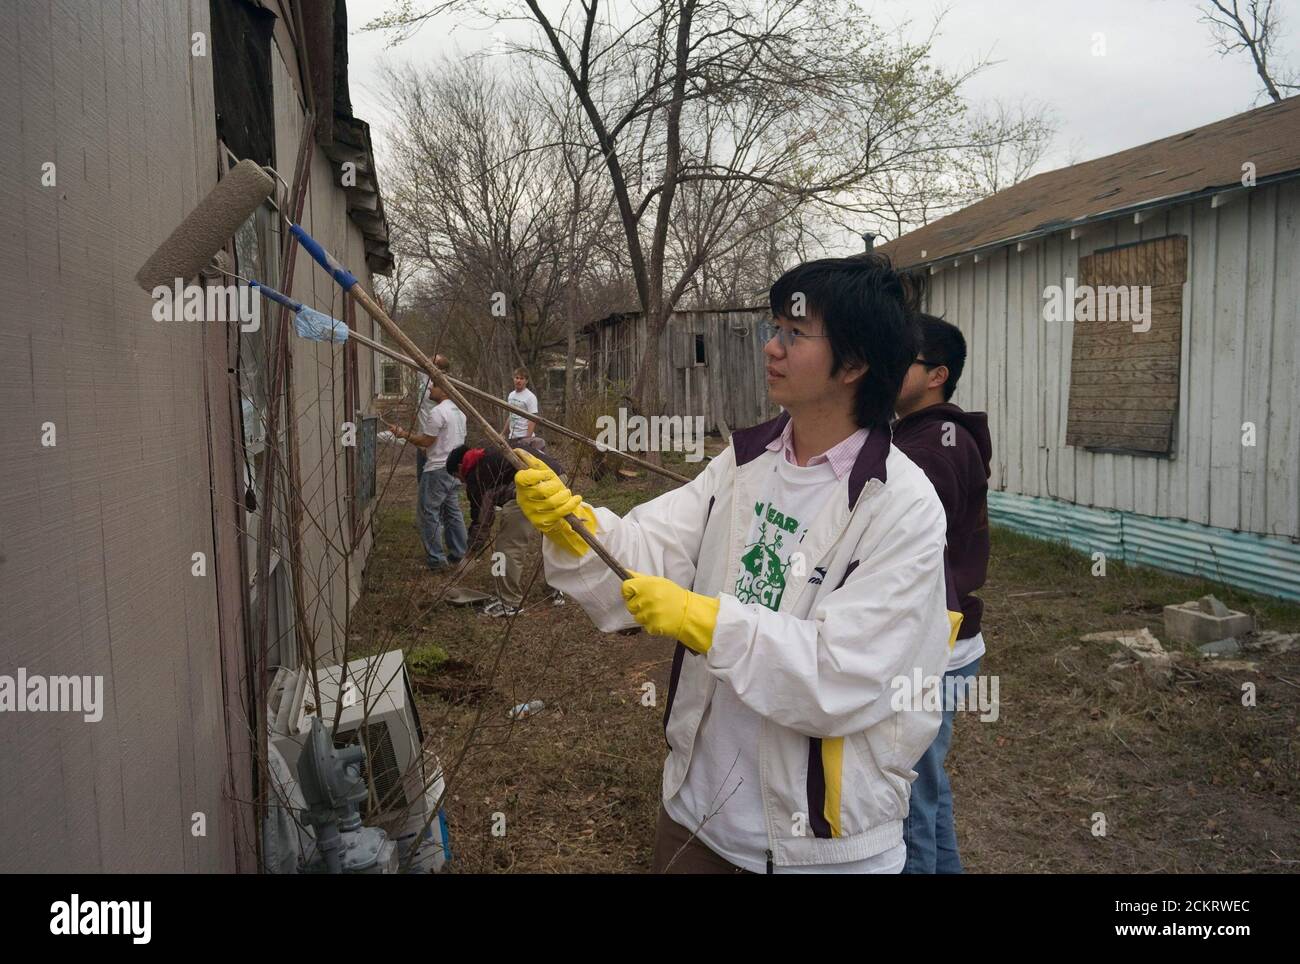 Austin, TX February 14, 2009: University of Texas at Austin students, including members of the Filipino-American Students Assn., work on sprucing up houses and public areas in east Austin as part of the second annual Clinton Global Initiative University, a conference bringing together students to take action on global challenges such as poverty, hunger, energy, climate change and global health. The program is patterned after Clinton Global Initiative Foundation formed by President Bill Clinton. ©Bob Daemmrich Stock Photo